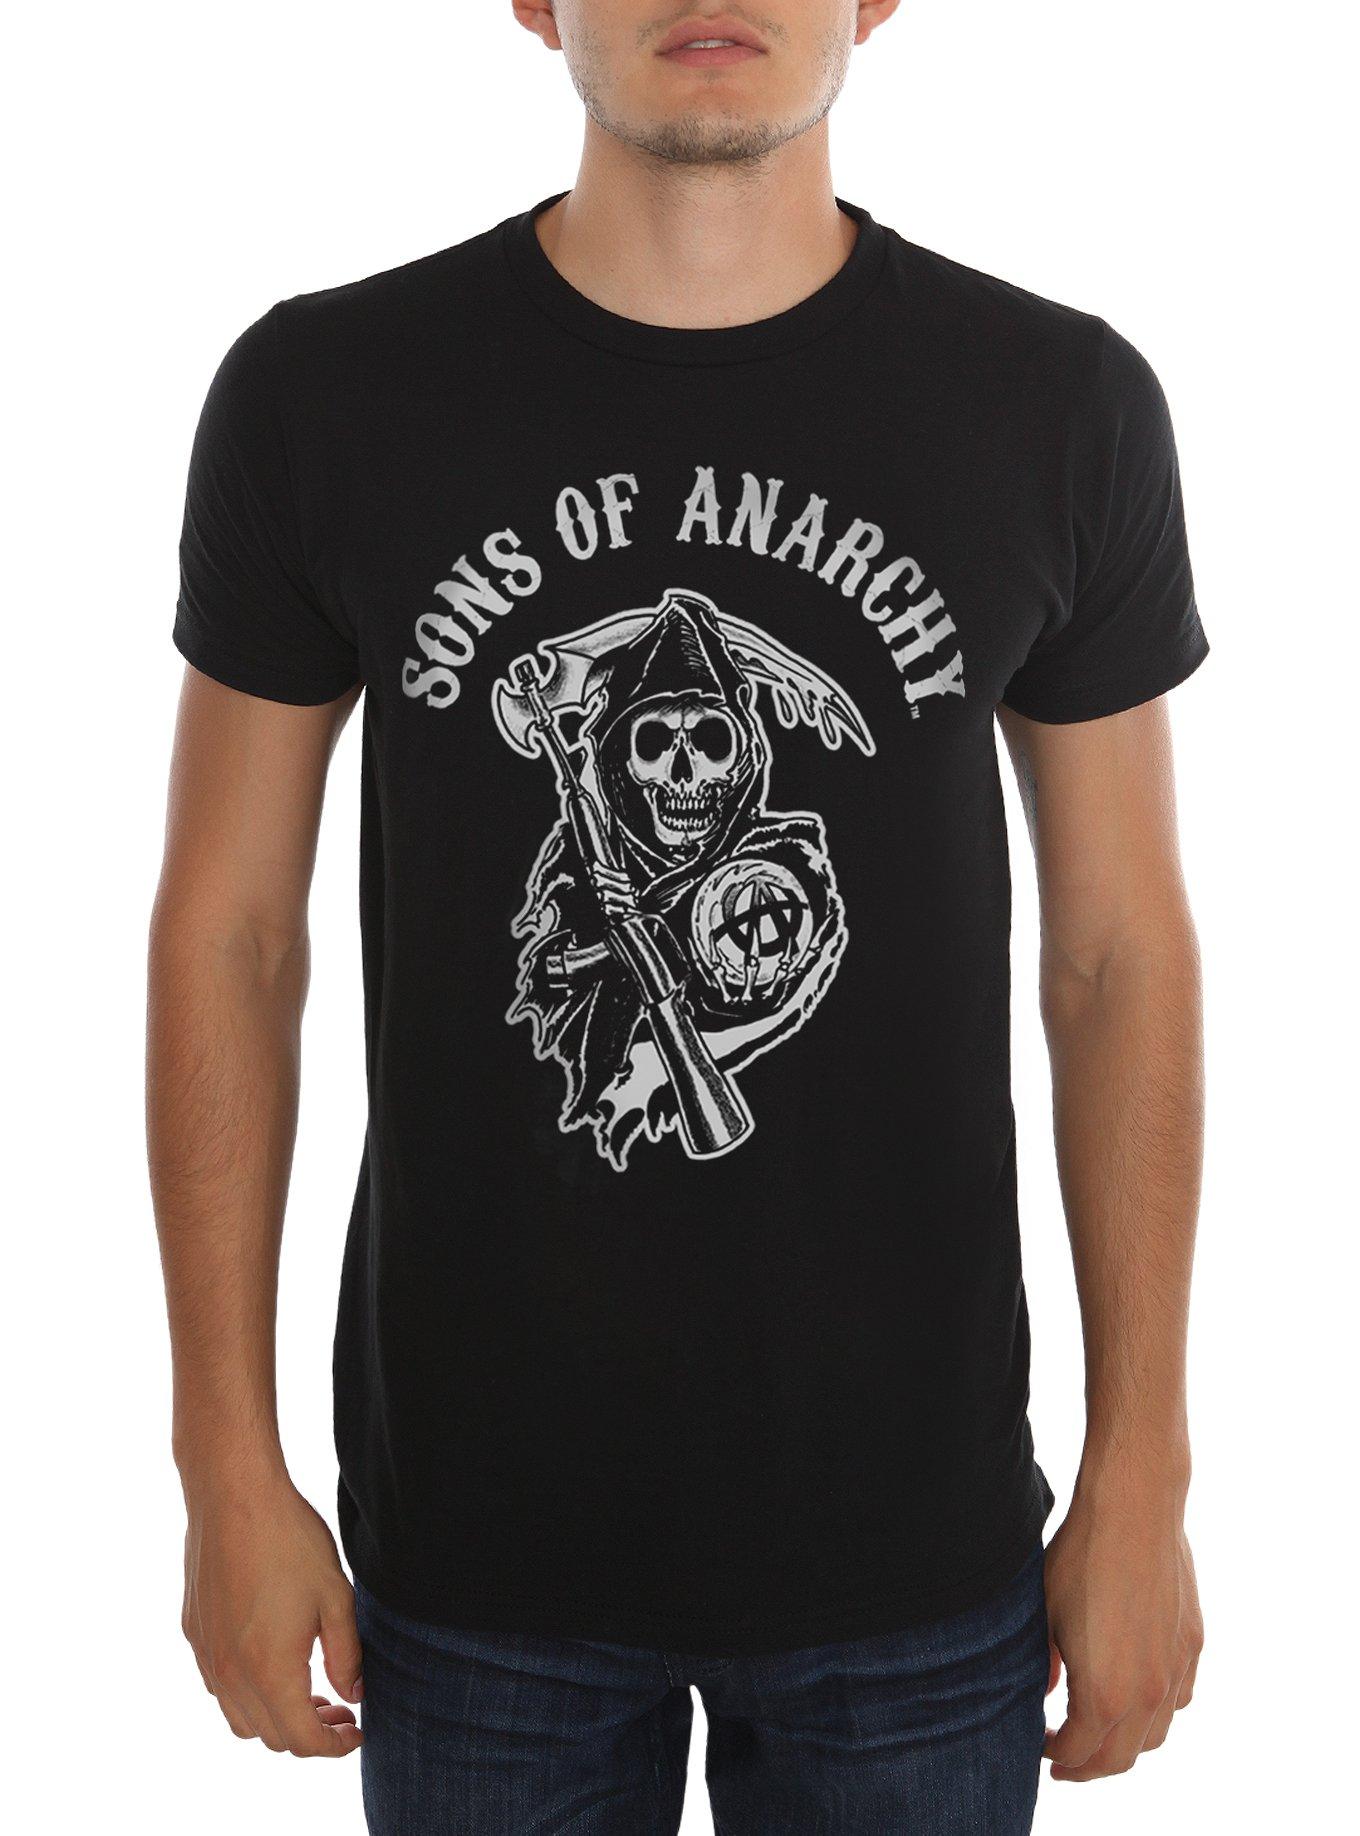 Anarchy Sons Logo Of | Hot Topic T-Shirt